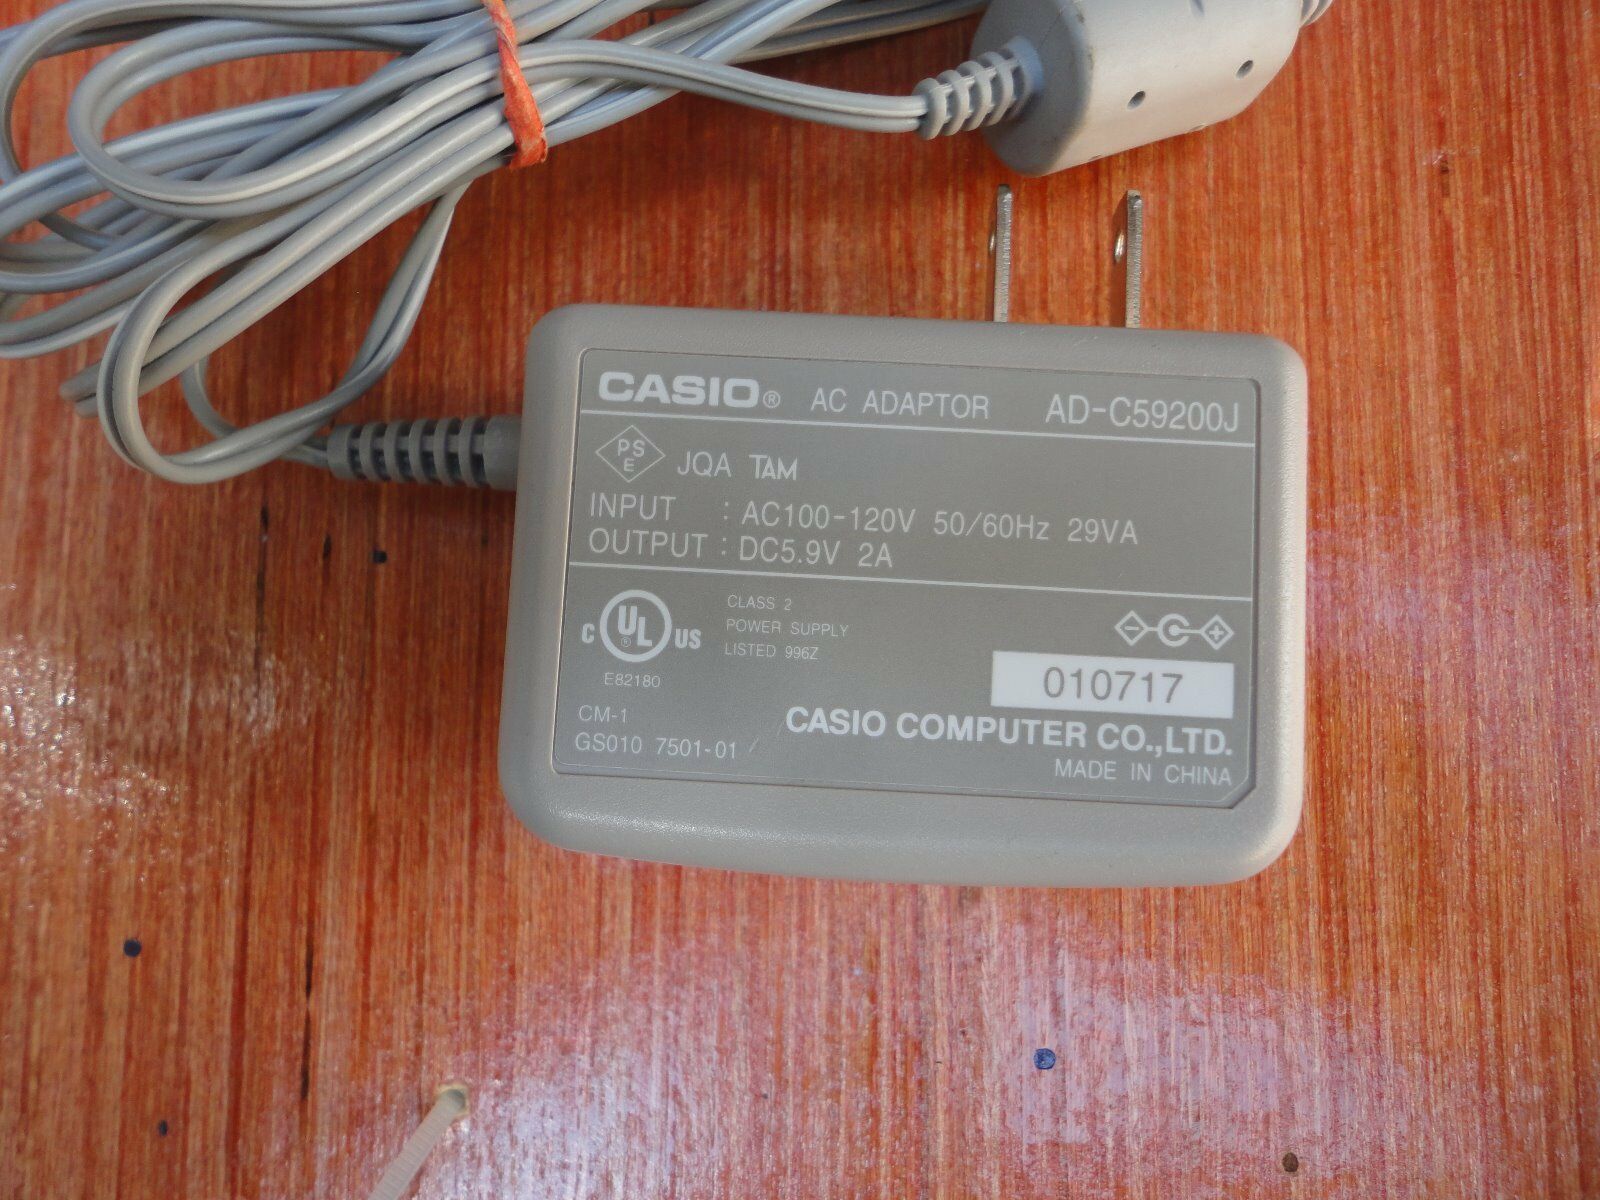 New 5.9V 2A Casio AD-C59200J Switching Power Supply AC/DC Adapter - Click Image to Close